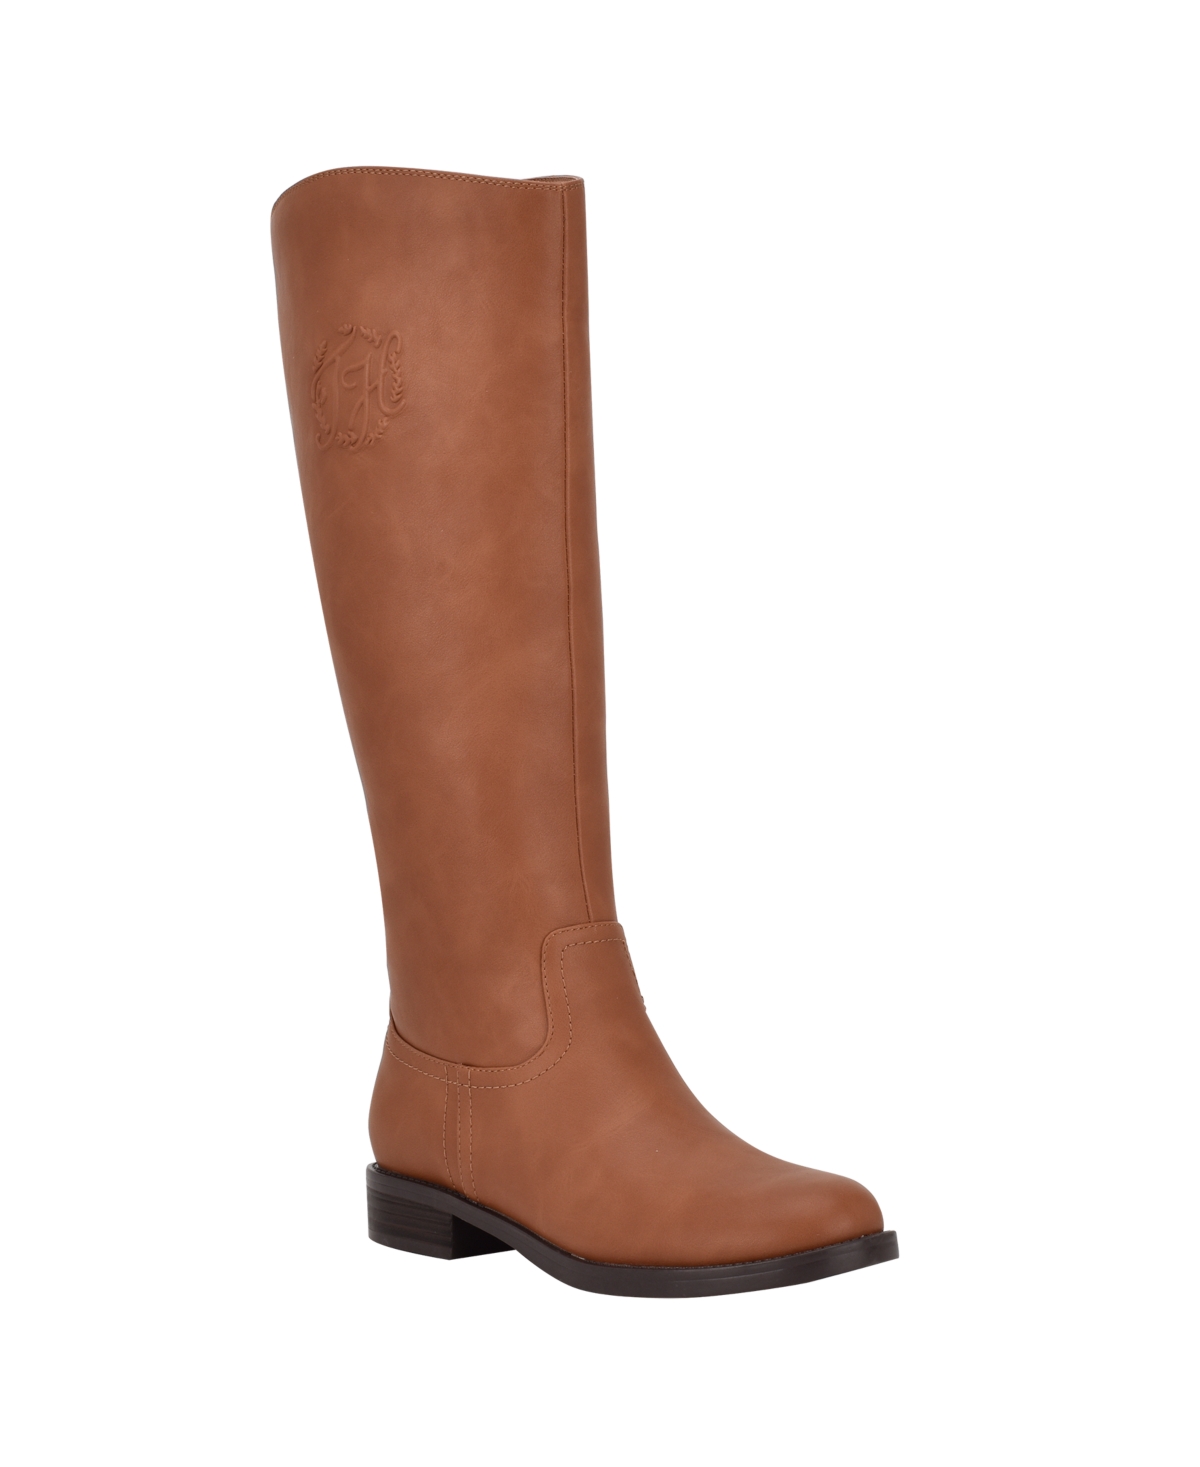 UPC 195972921306 product image for Tommy Hilfiger Women's Rydings Riding Boots Women's Shoes | upcitemdb.com